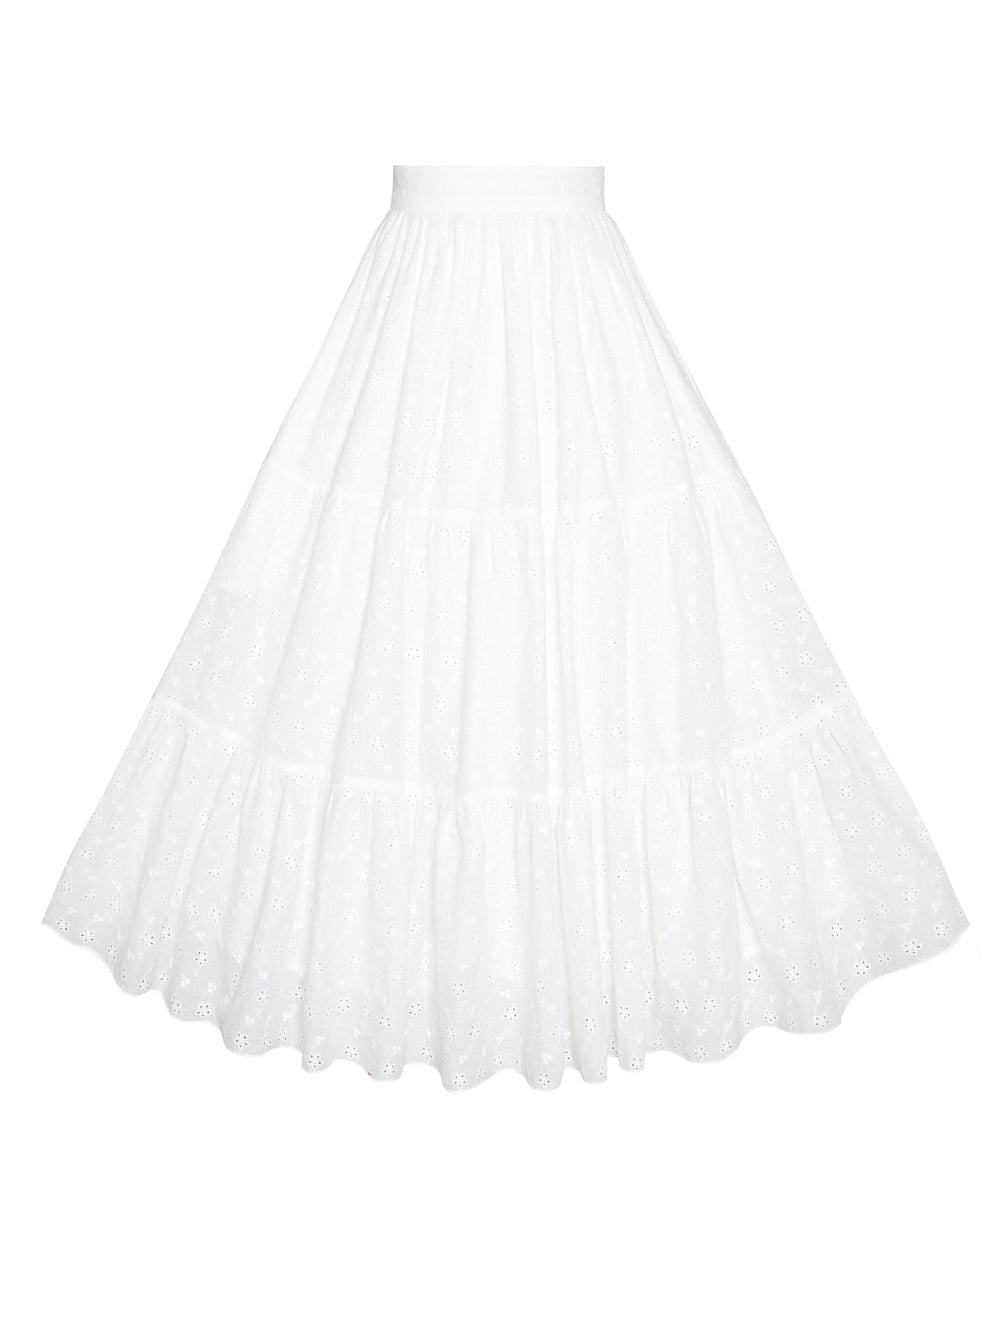 MTO - Pippa Skirt White "Forget Me Not" Eyelet